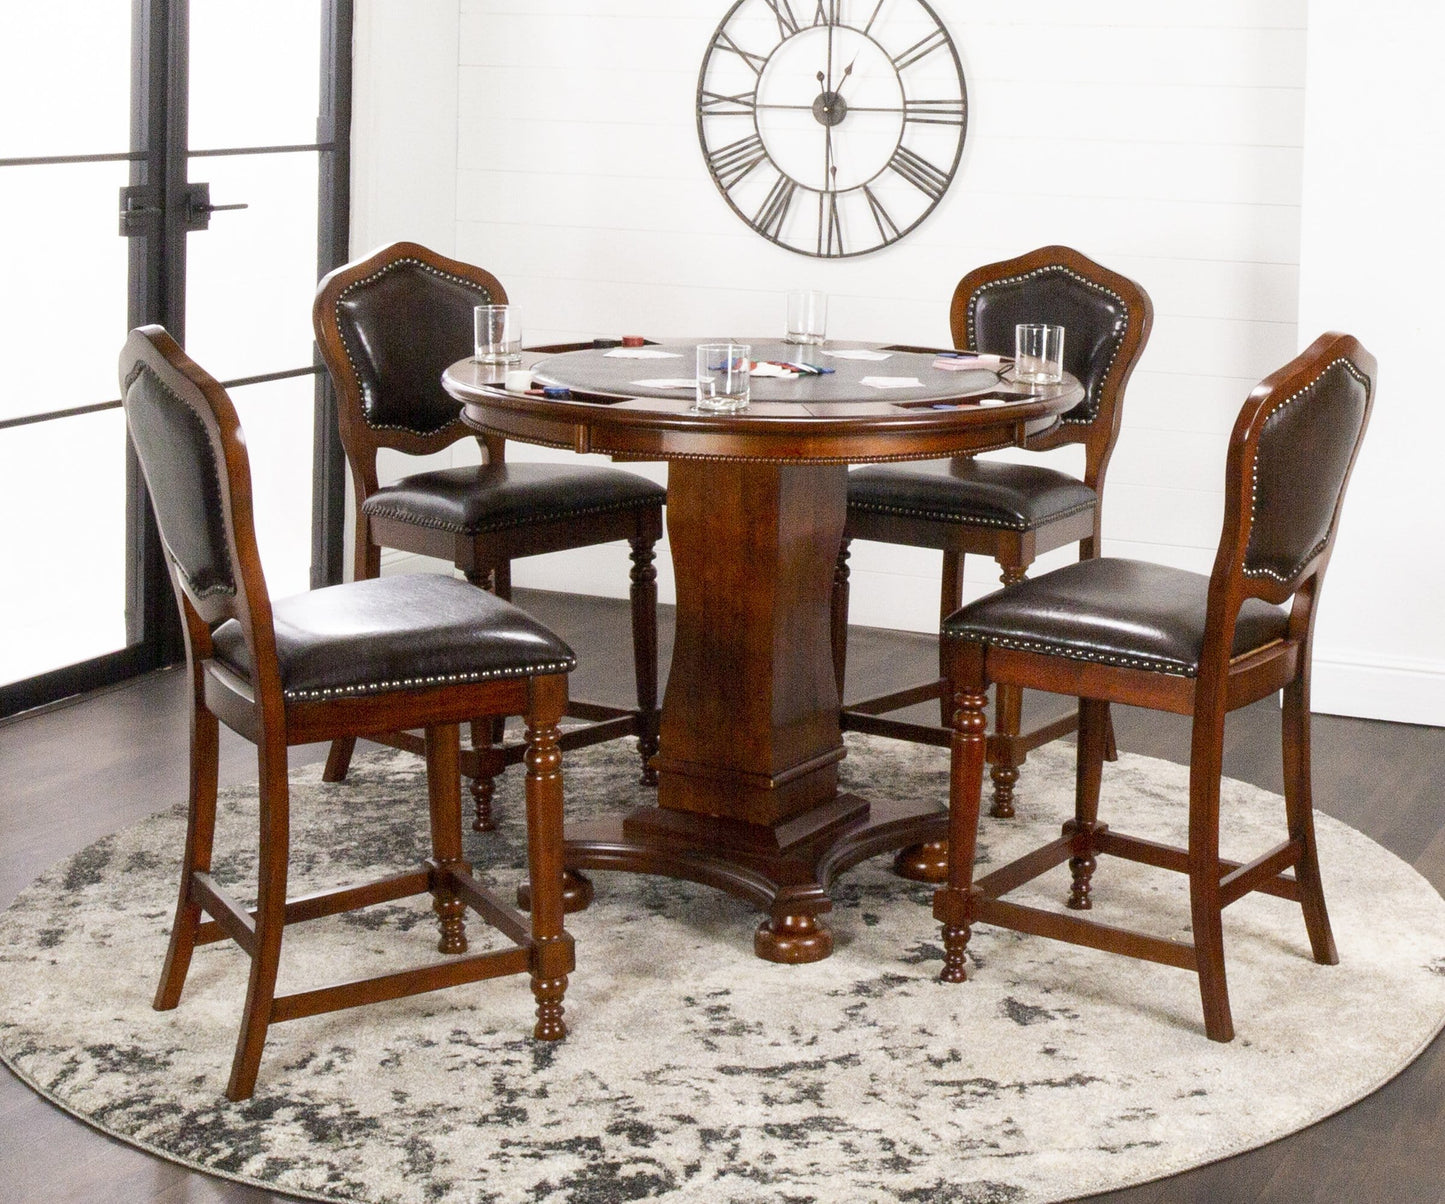 Counter Height chairs shown as part of a set of five with the 2 in 1 poker table. Set sold separately